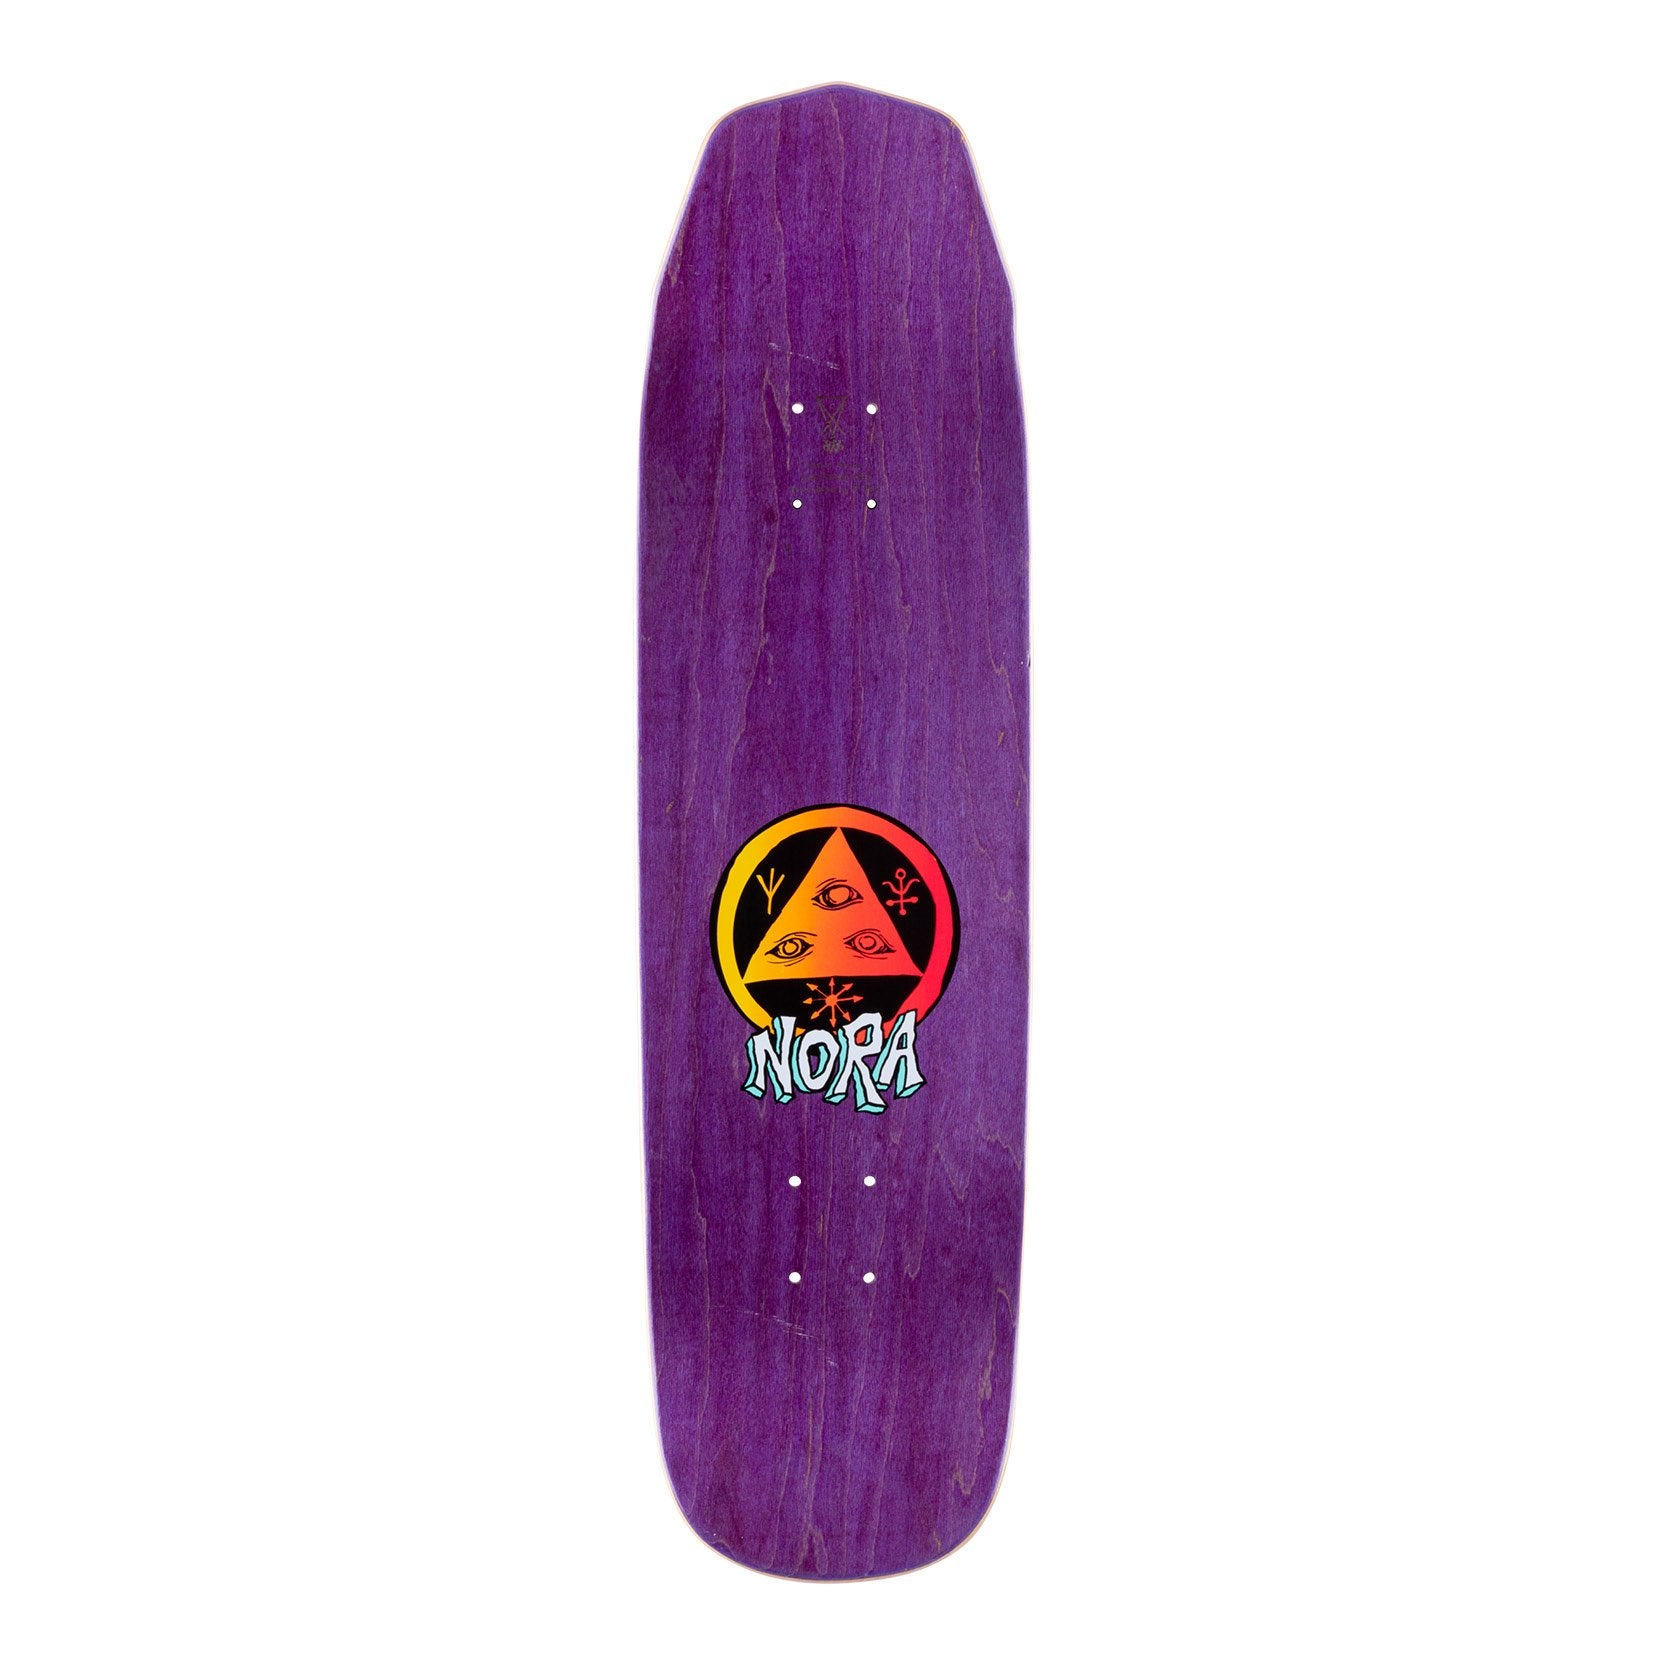 WELCOME DECK - NORA VASONCELLOS TEDDY ON WICKED QUEEN (8.6") - The Drive Skateshop